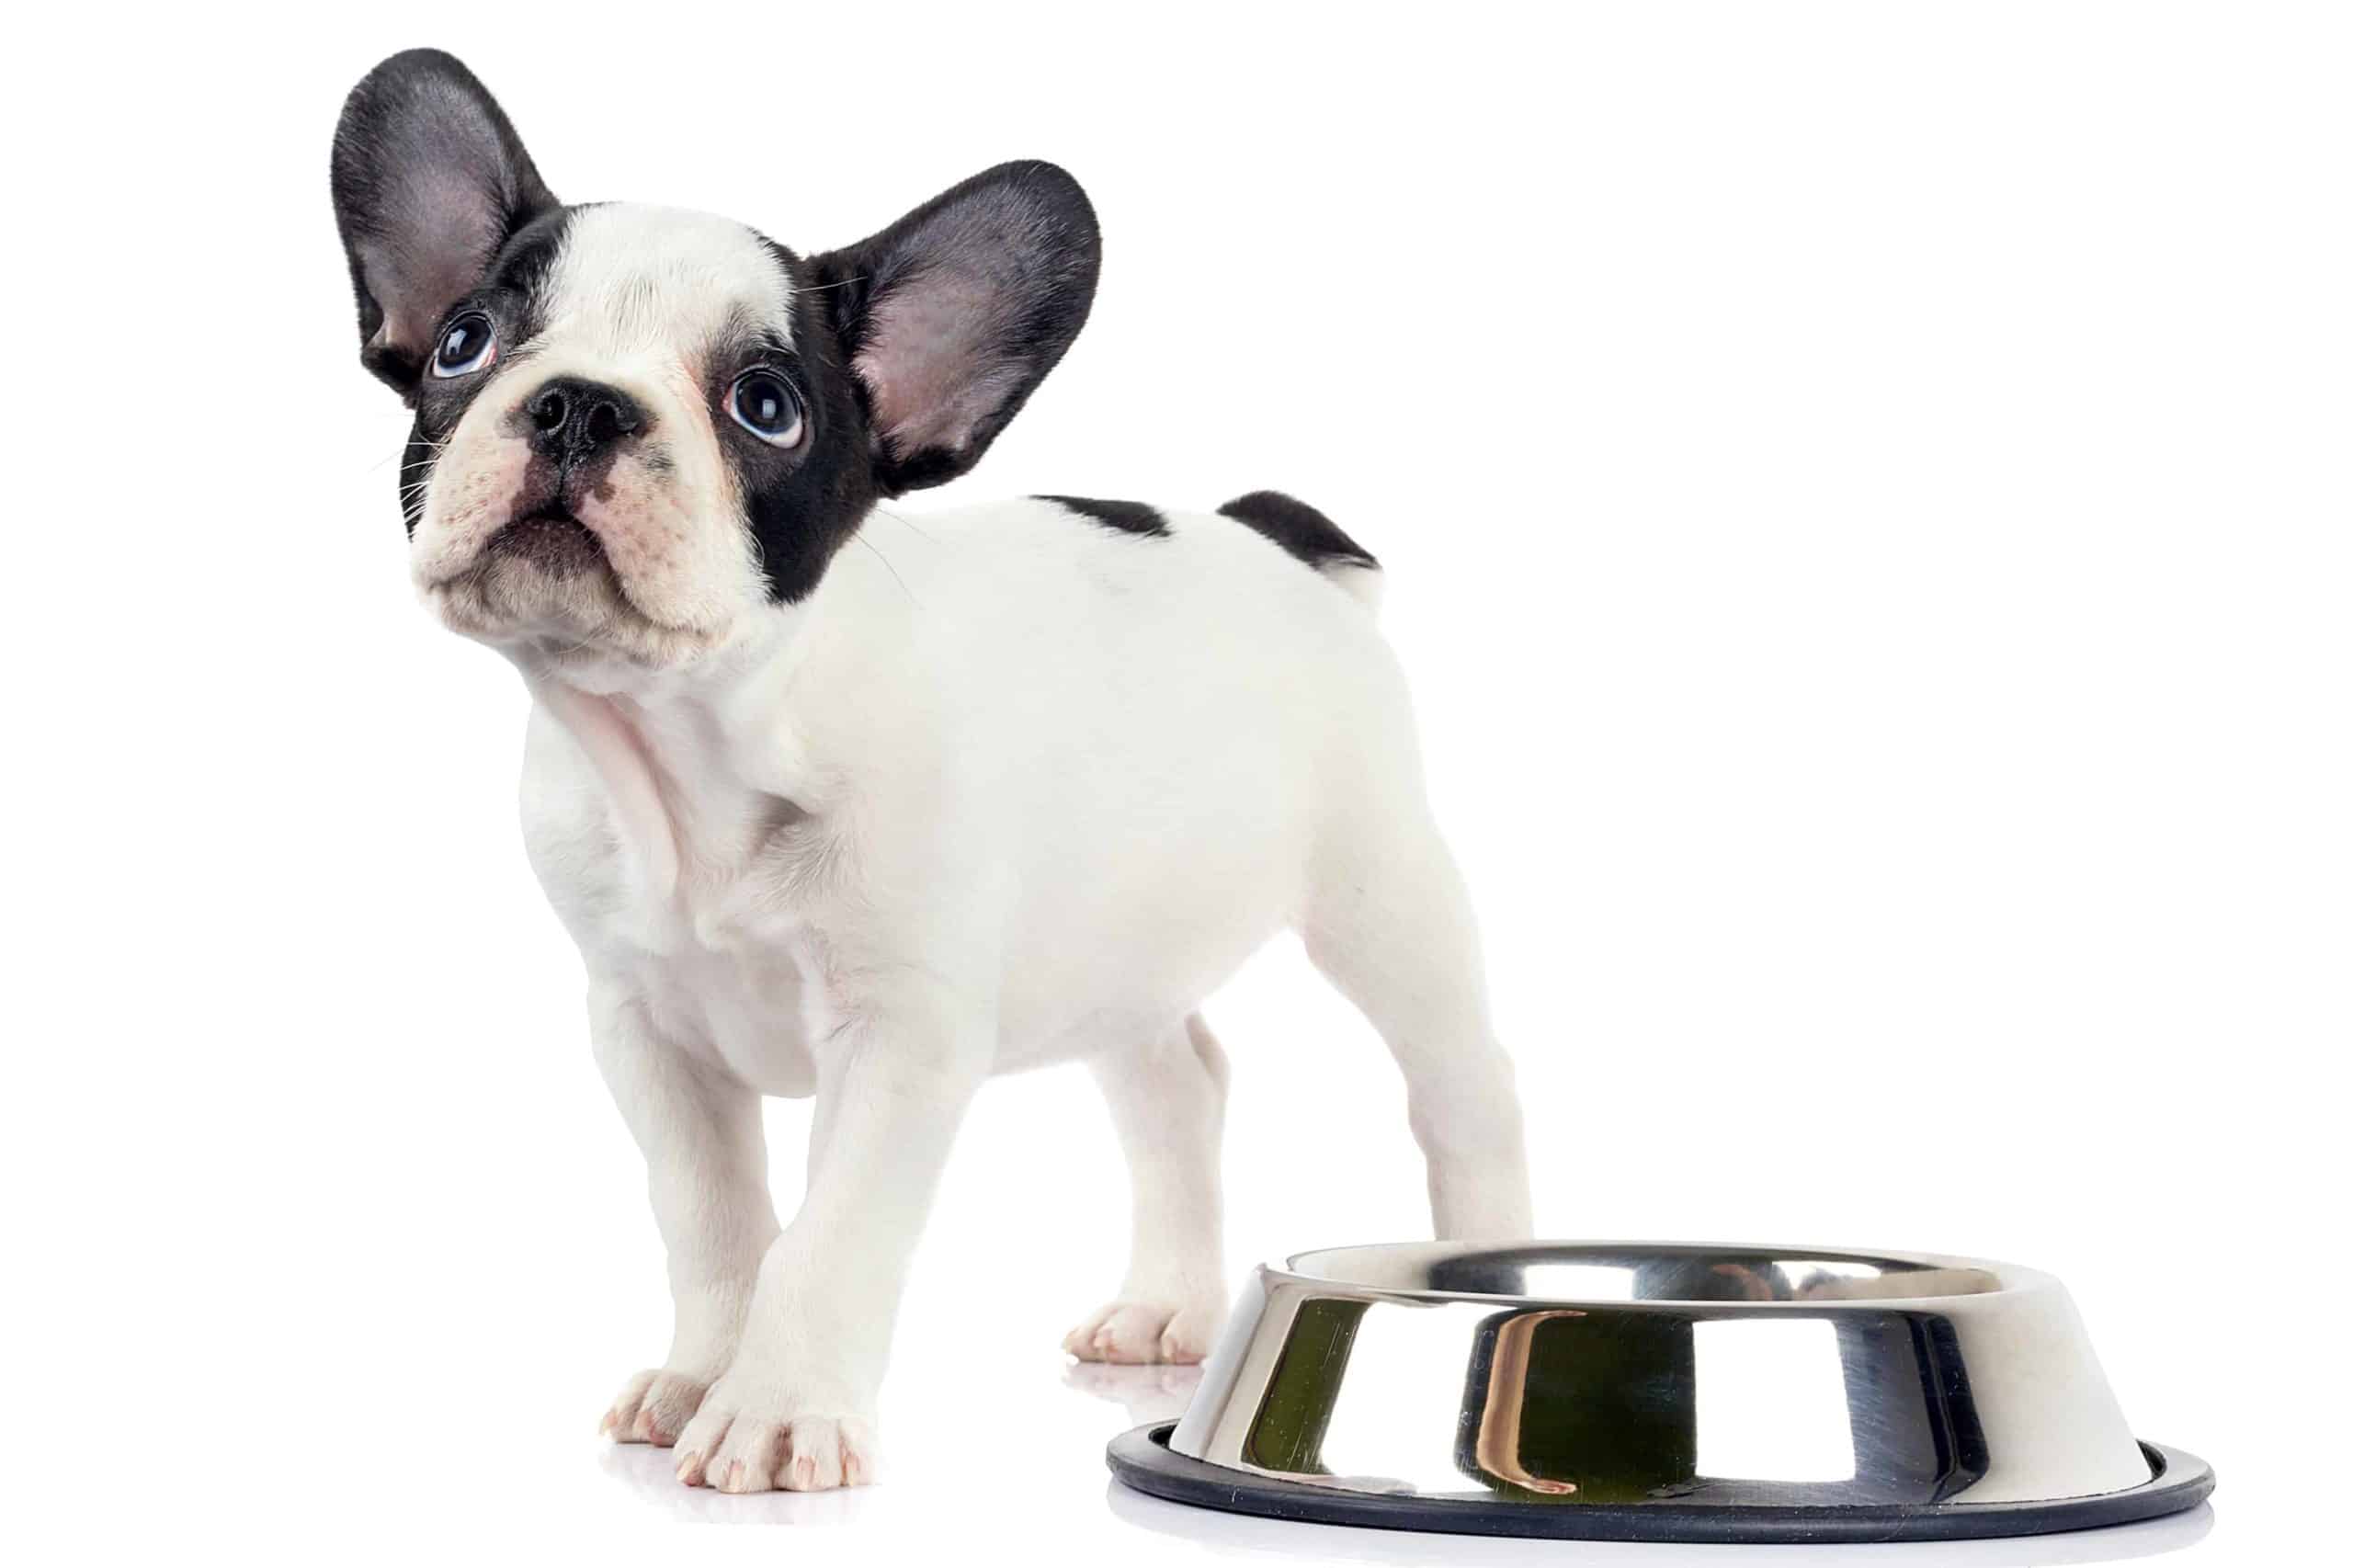 Hungry Boston Terrier stands next to food bowl. Ensure your dog eats a healthy diet by feeding high-quality food and adding kefir, bone broth, and fruits and vegetables.